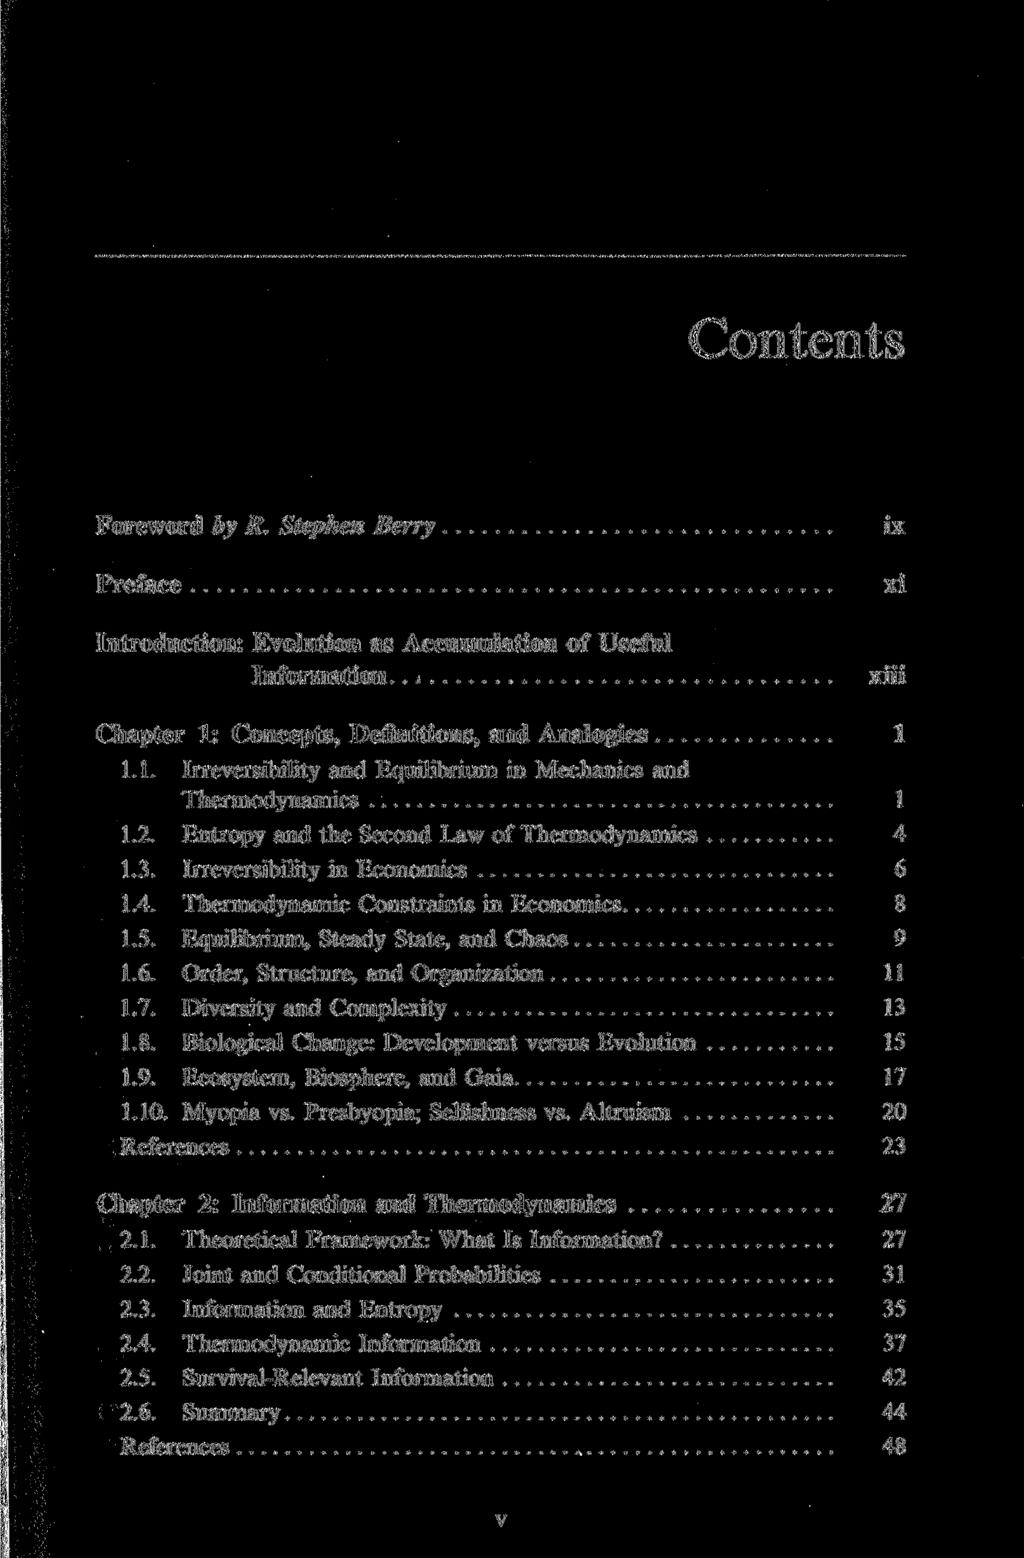 Contents Foreword by R. Stephen Berry Preface Introduction: Evolution as Accumulation of Useful Information.. ix xi xiii Chapter 1: Concepts, Definitions, and Analogies 1 1.1. Irreversibility and Equilibrium in Mechanics and Thermodynamics 1 1.